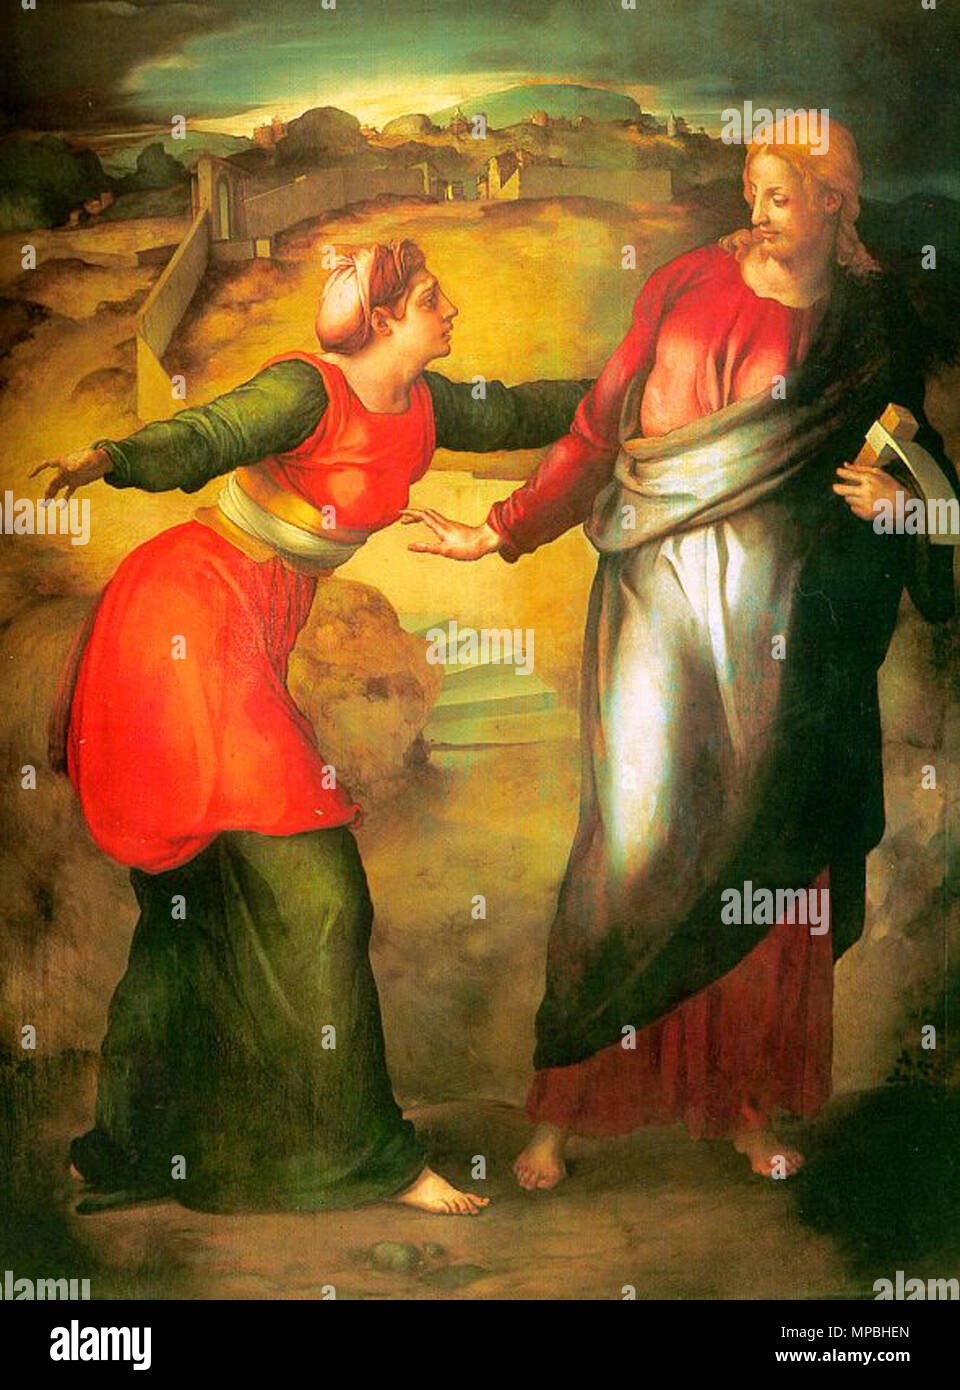 Noli Me Tangere . Michelangelo created for Alfonso d'Avalos the cartoon